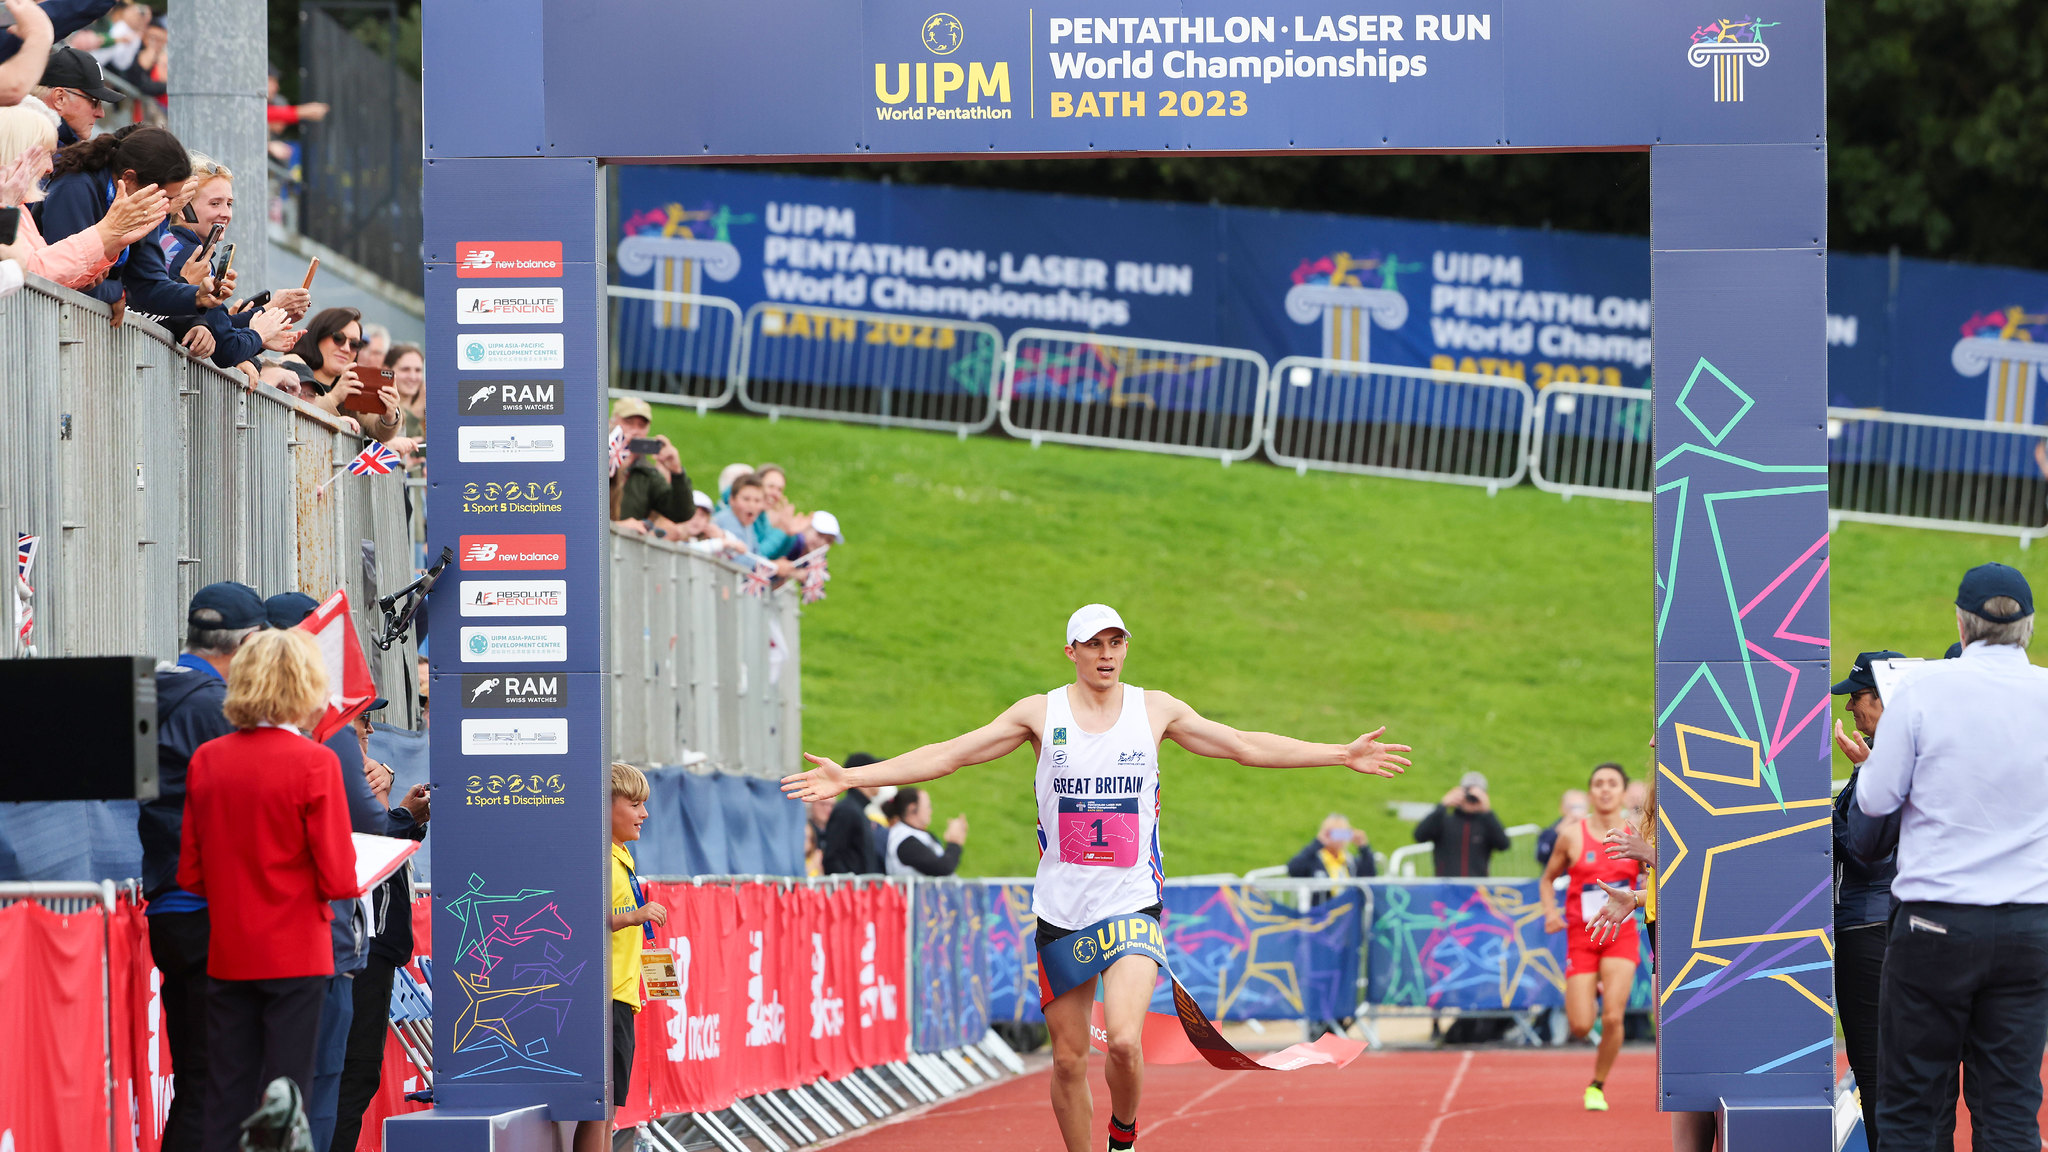 A picture of Joe Choong crossing the finish line in the men's final at the UIPM Pentathlon World Championships 2023